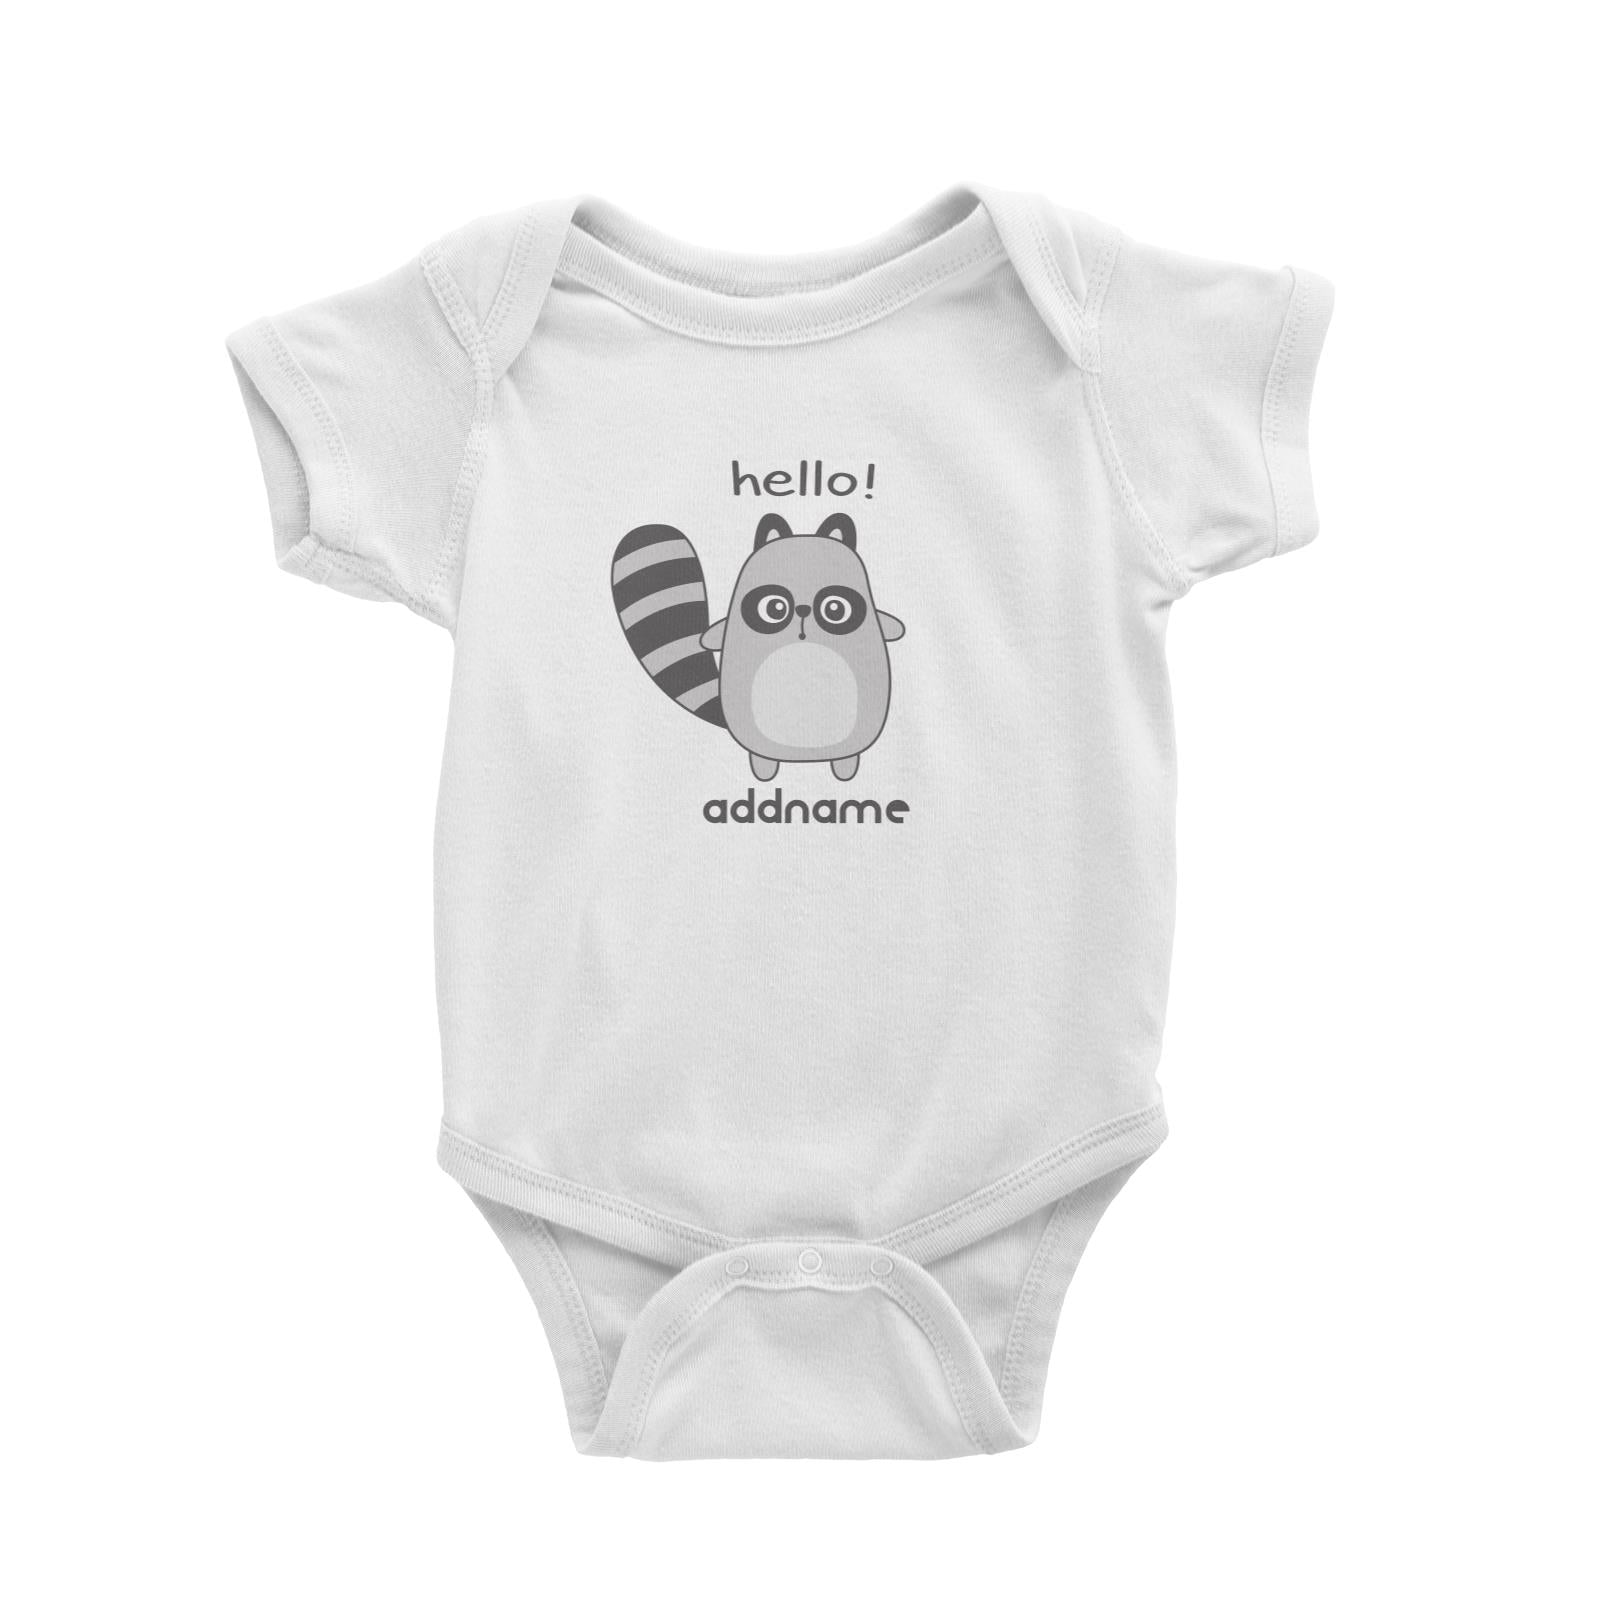 Cool Cute Animals Racoon Hello Addname Baby Romper